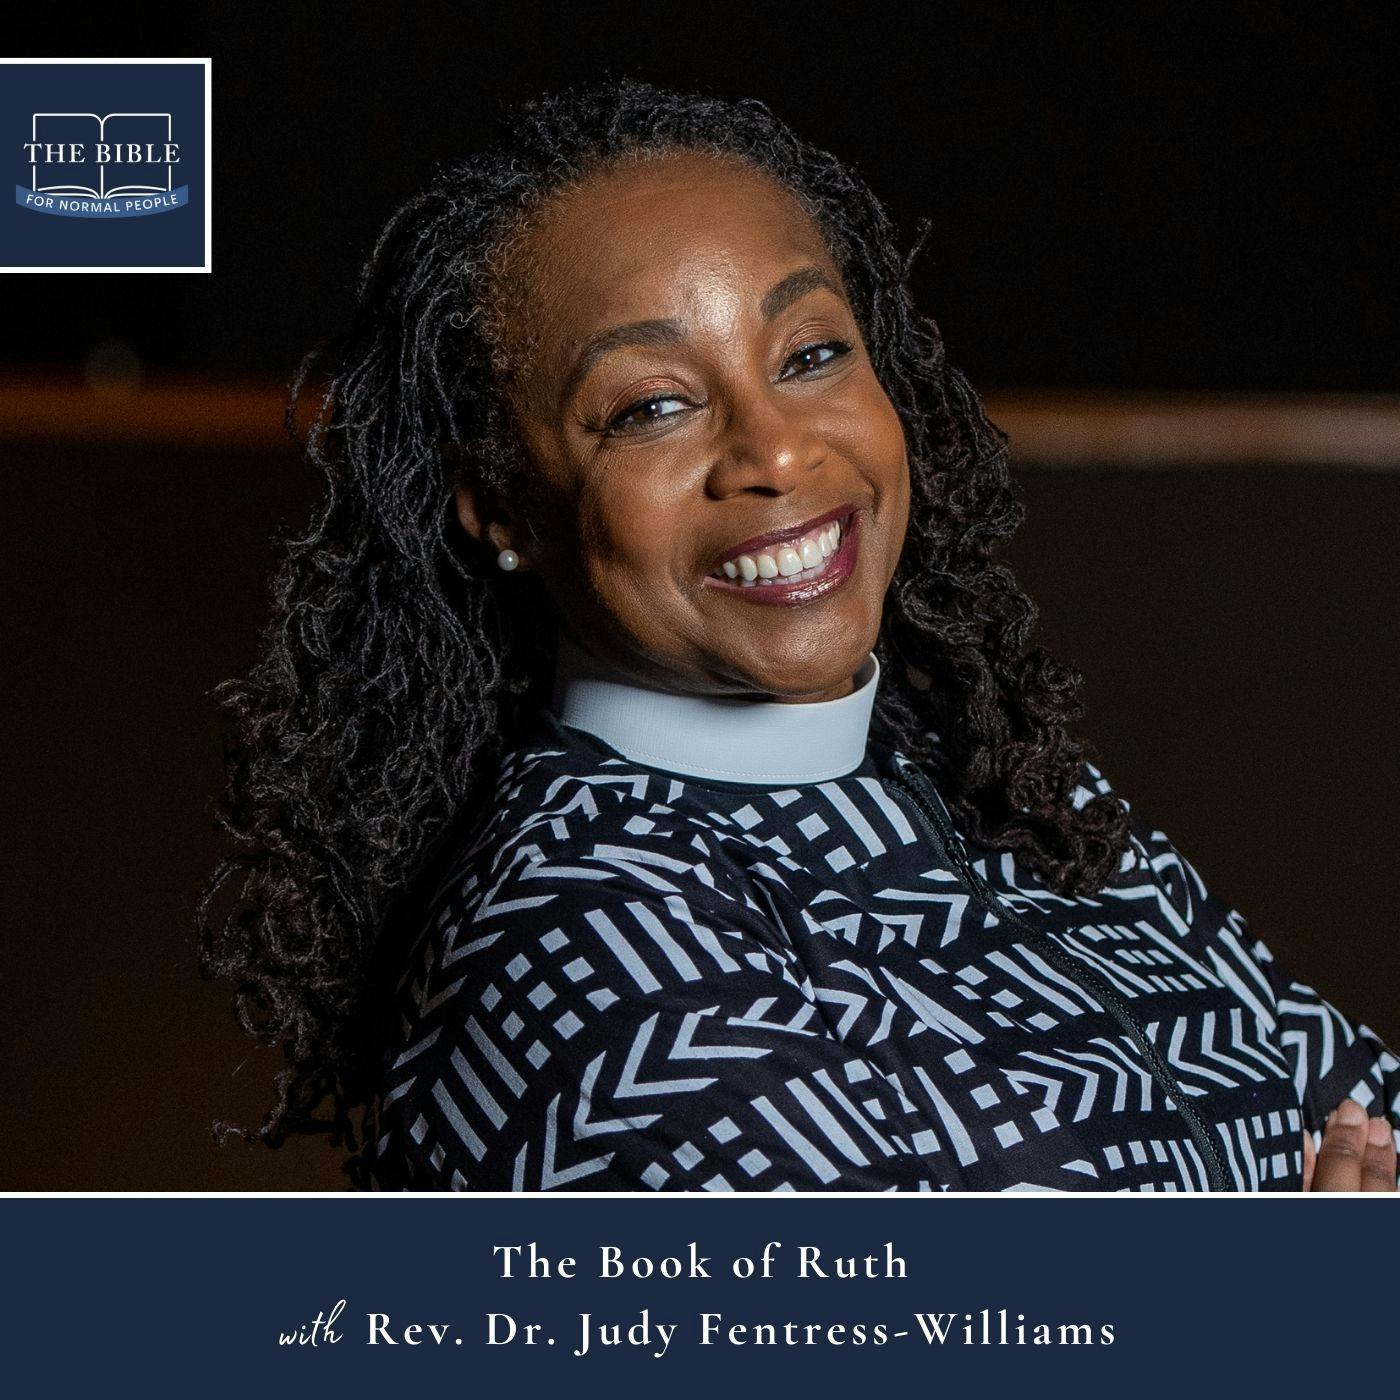 [Bible] Episode 253: Rev. Dr. Judy Fentress-Williams - The Book of Ruth